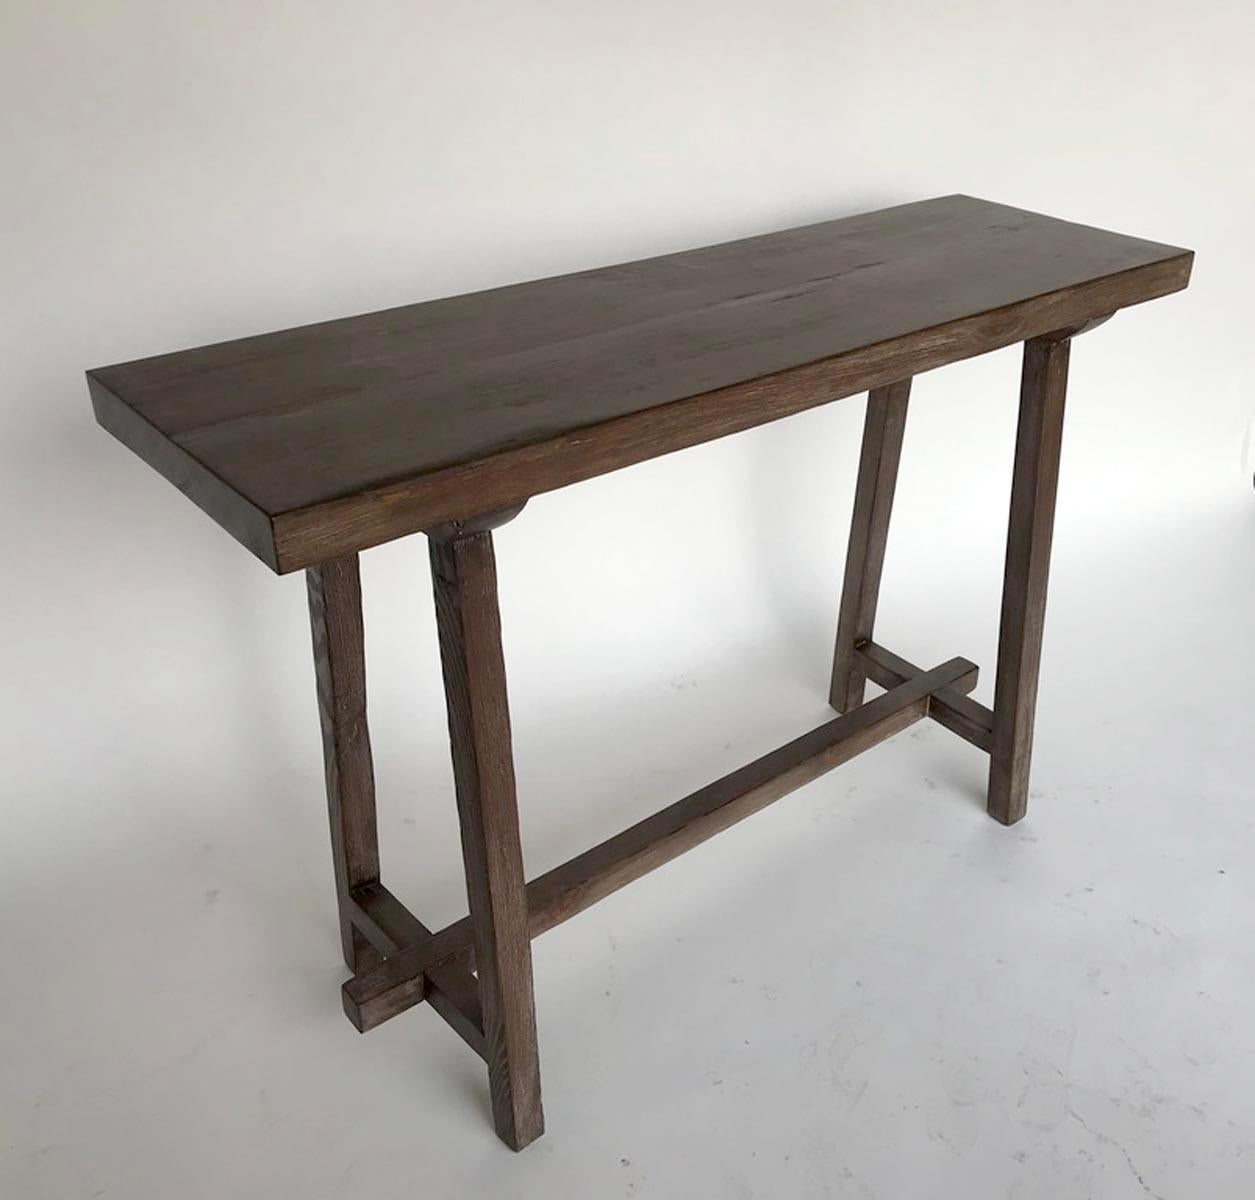 Reclaimed Douglas fir console with a two inch thick top. This piece is available off the floor but can also be made in custom sizes.
Made in Los Angeles by Dos Gallos Studio.